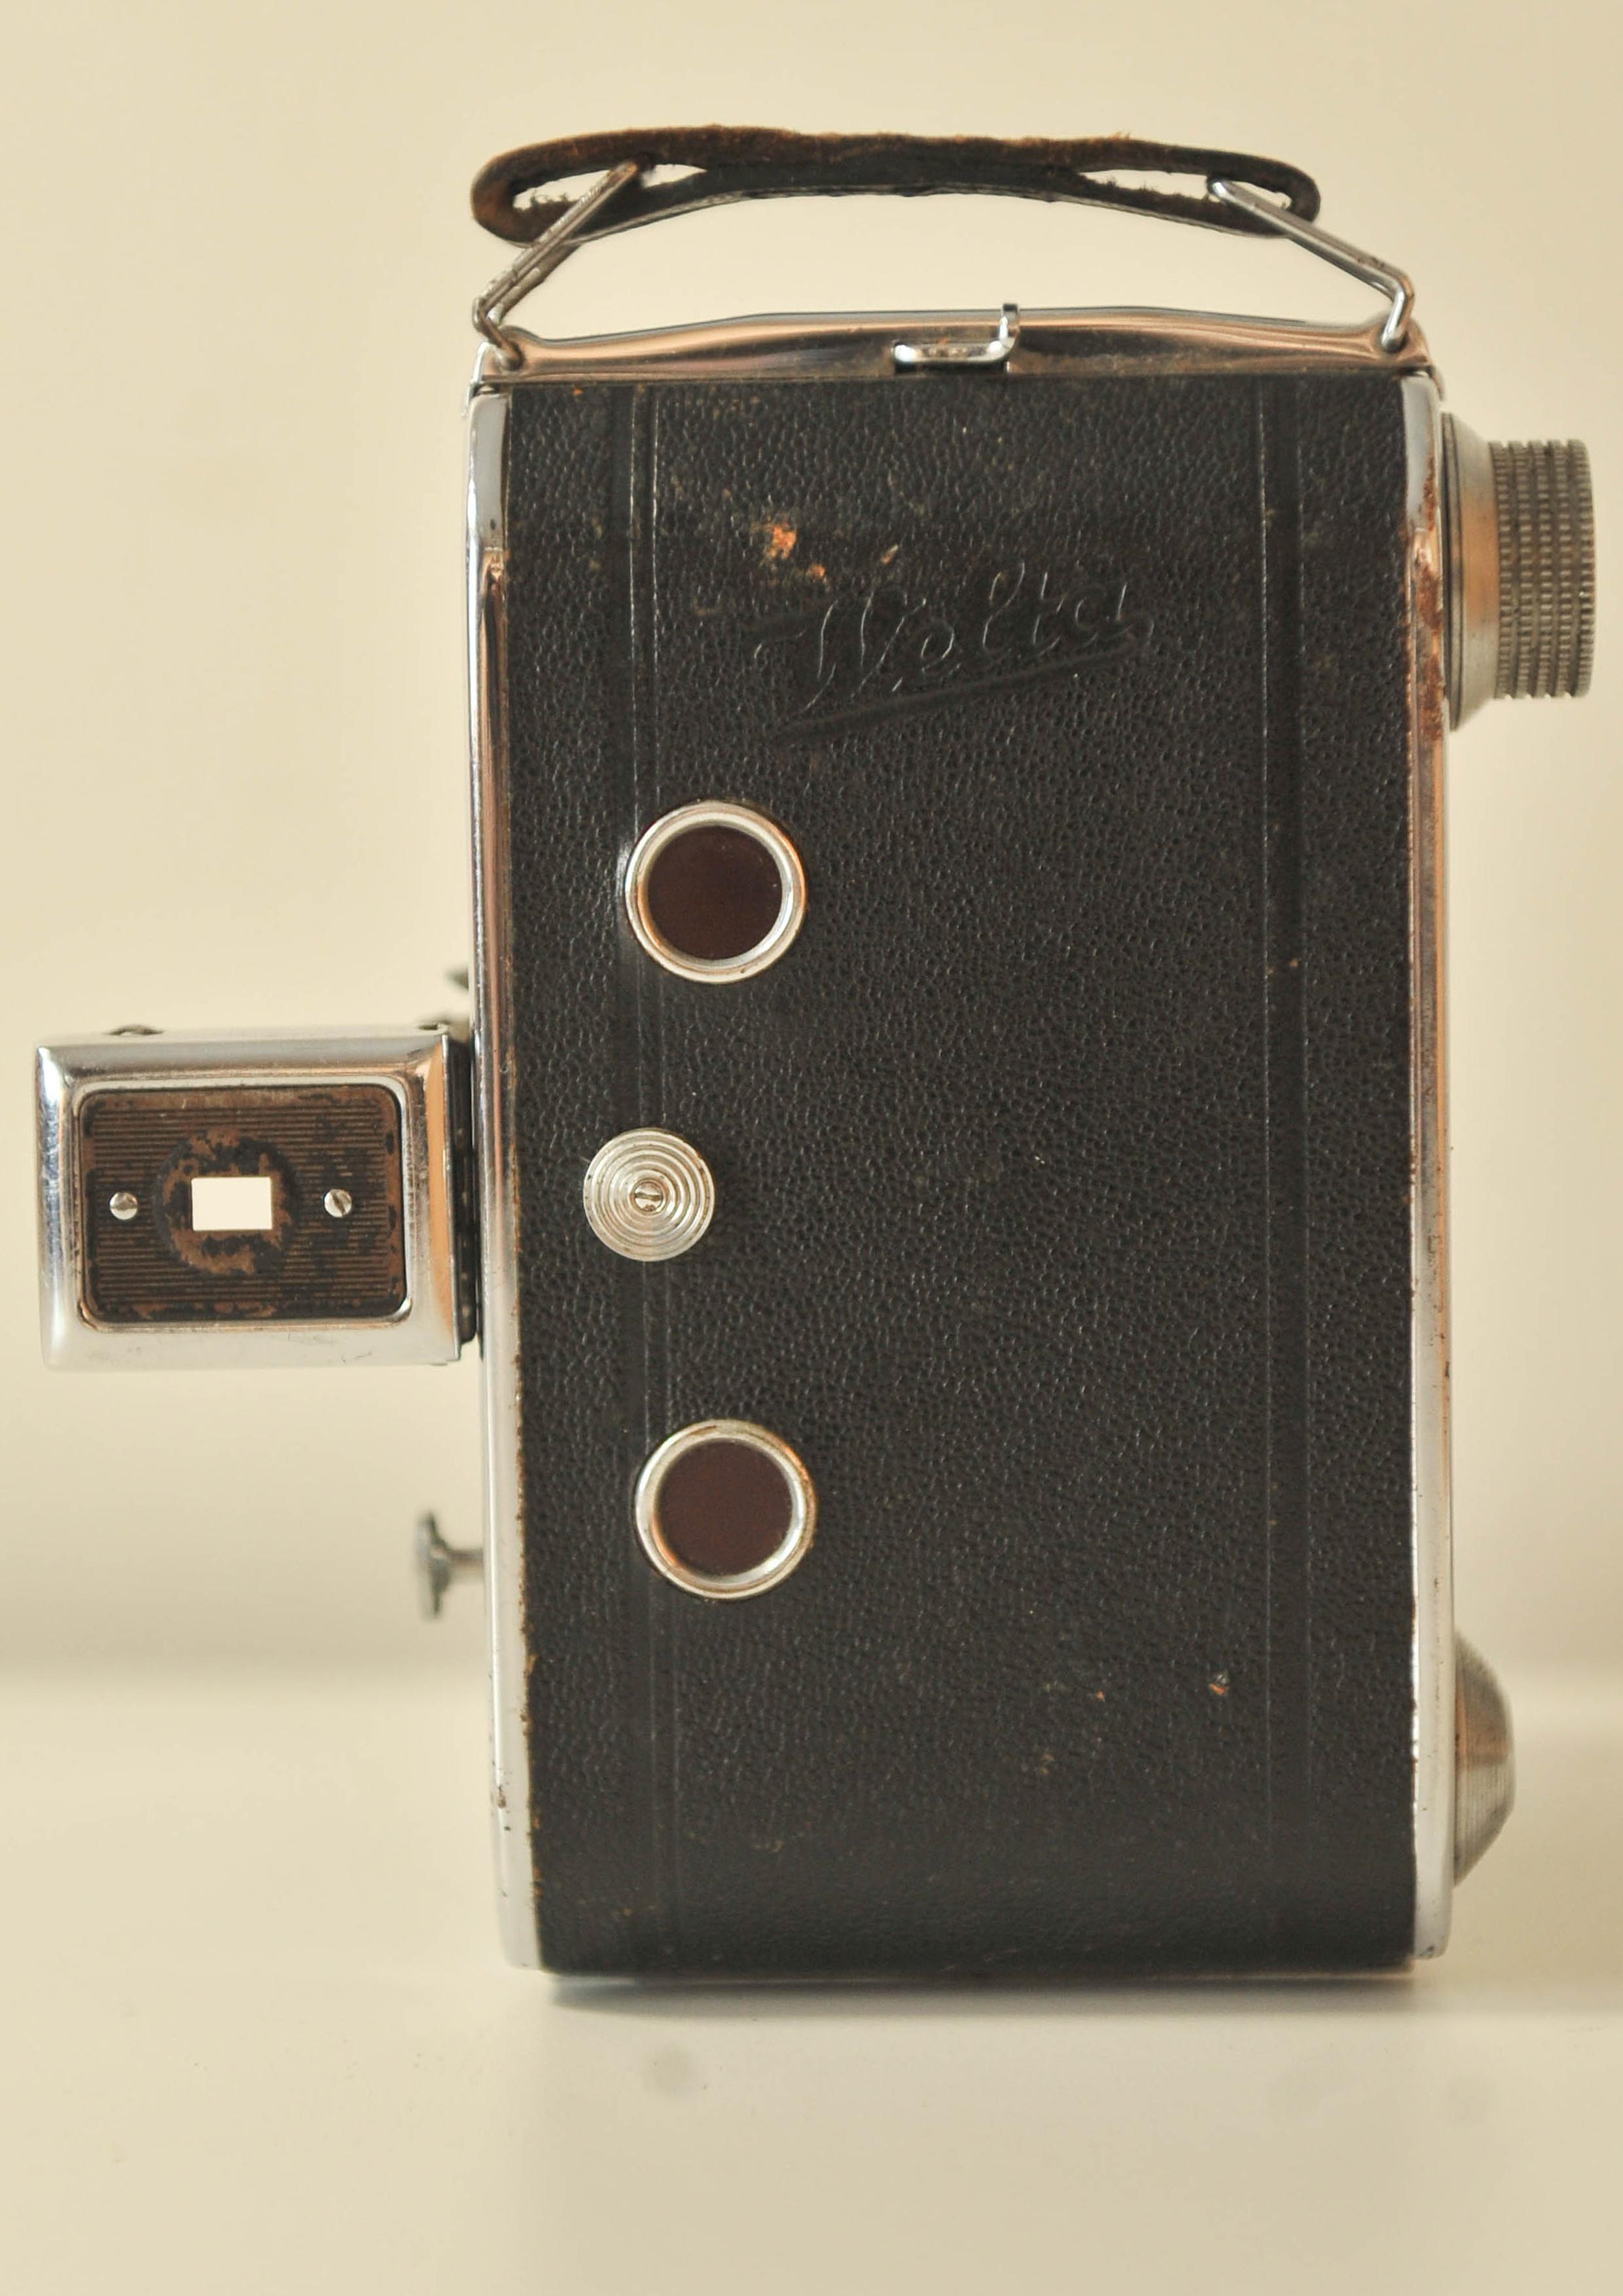 Perle Welta Prontor II Folding Bellow Camera with Meyer Görlitz Fixed Lens In Good Condition For Sale In High Wycombe, GB